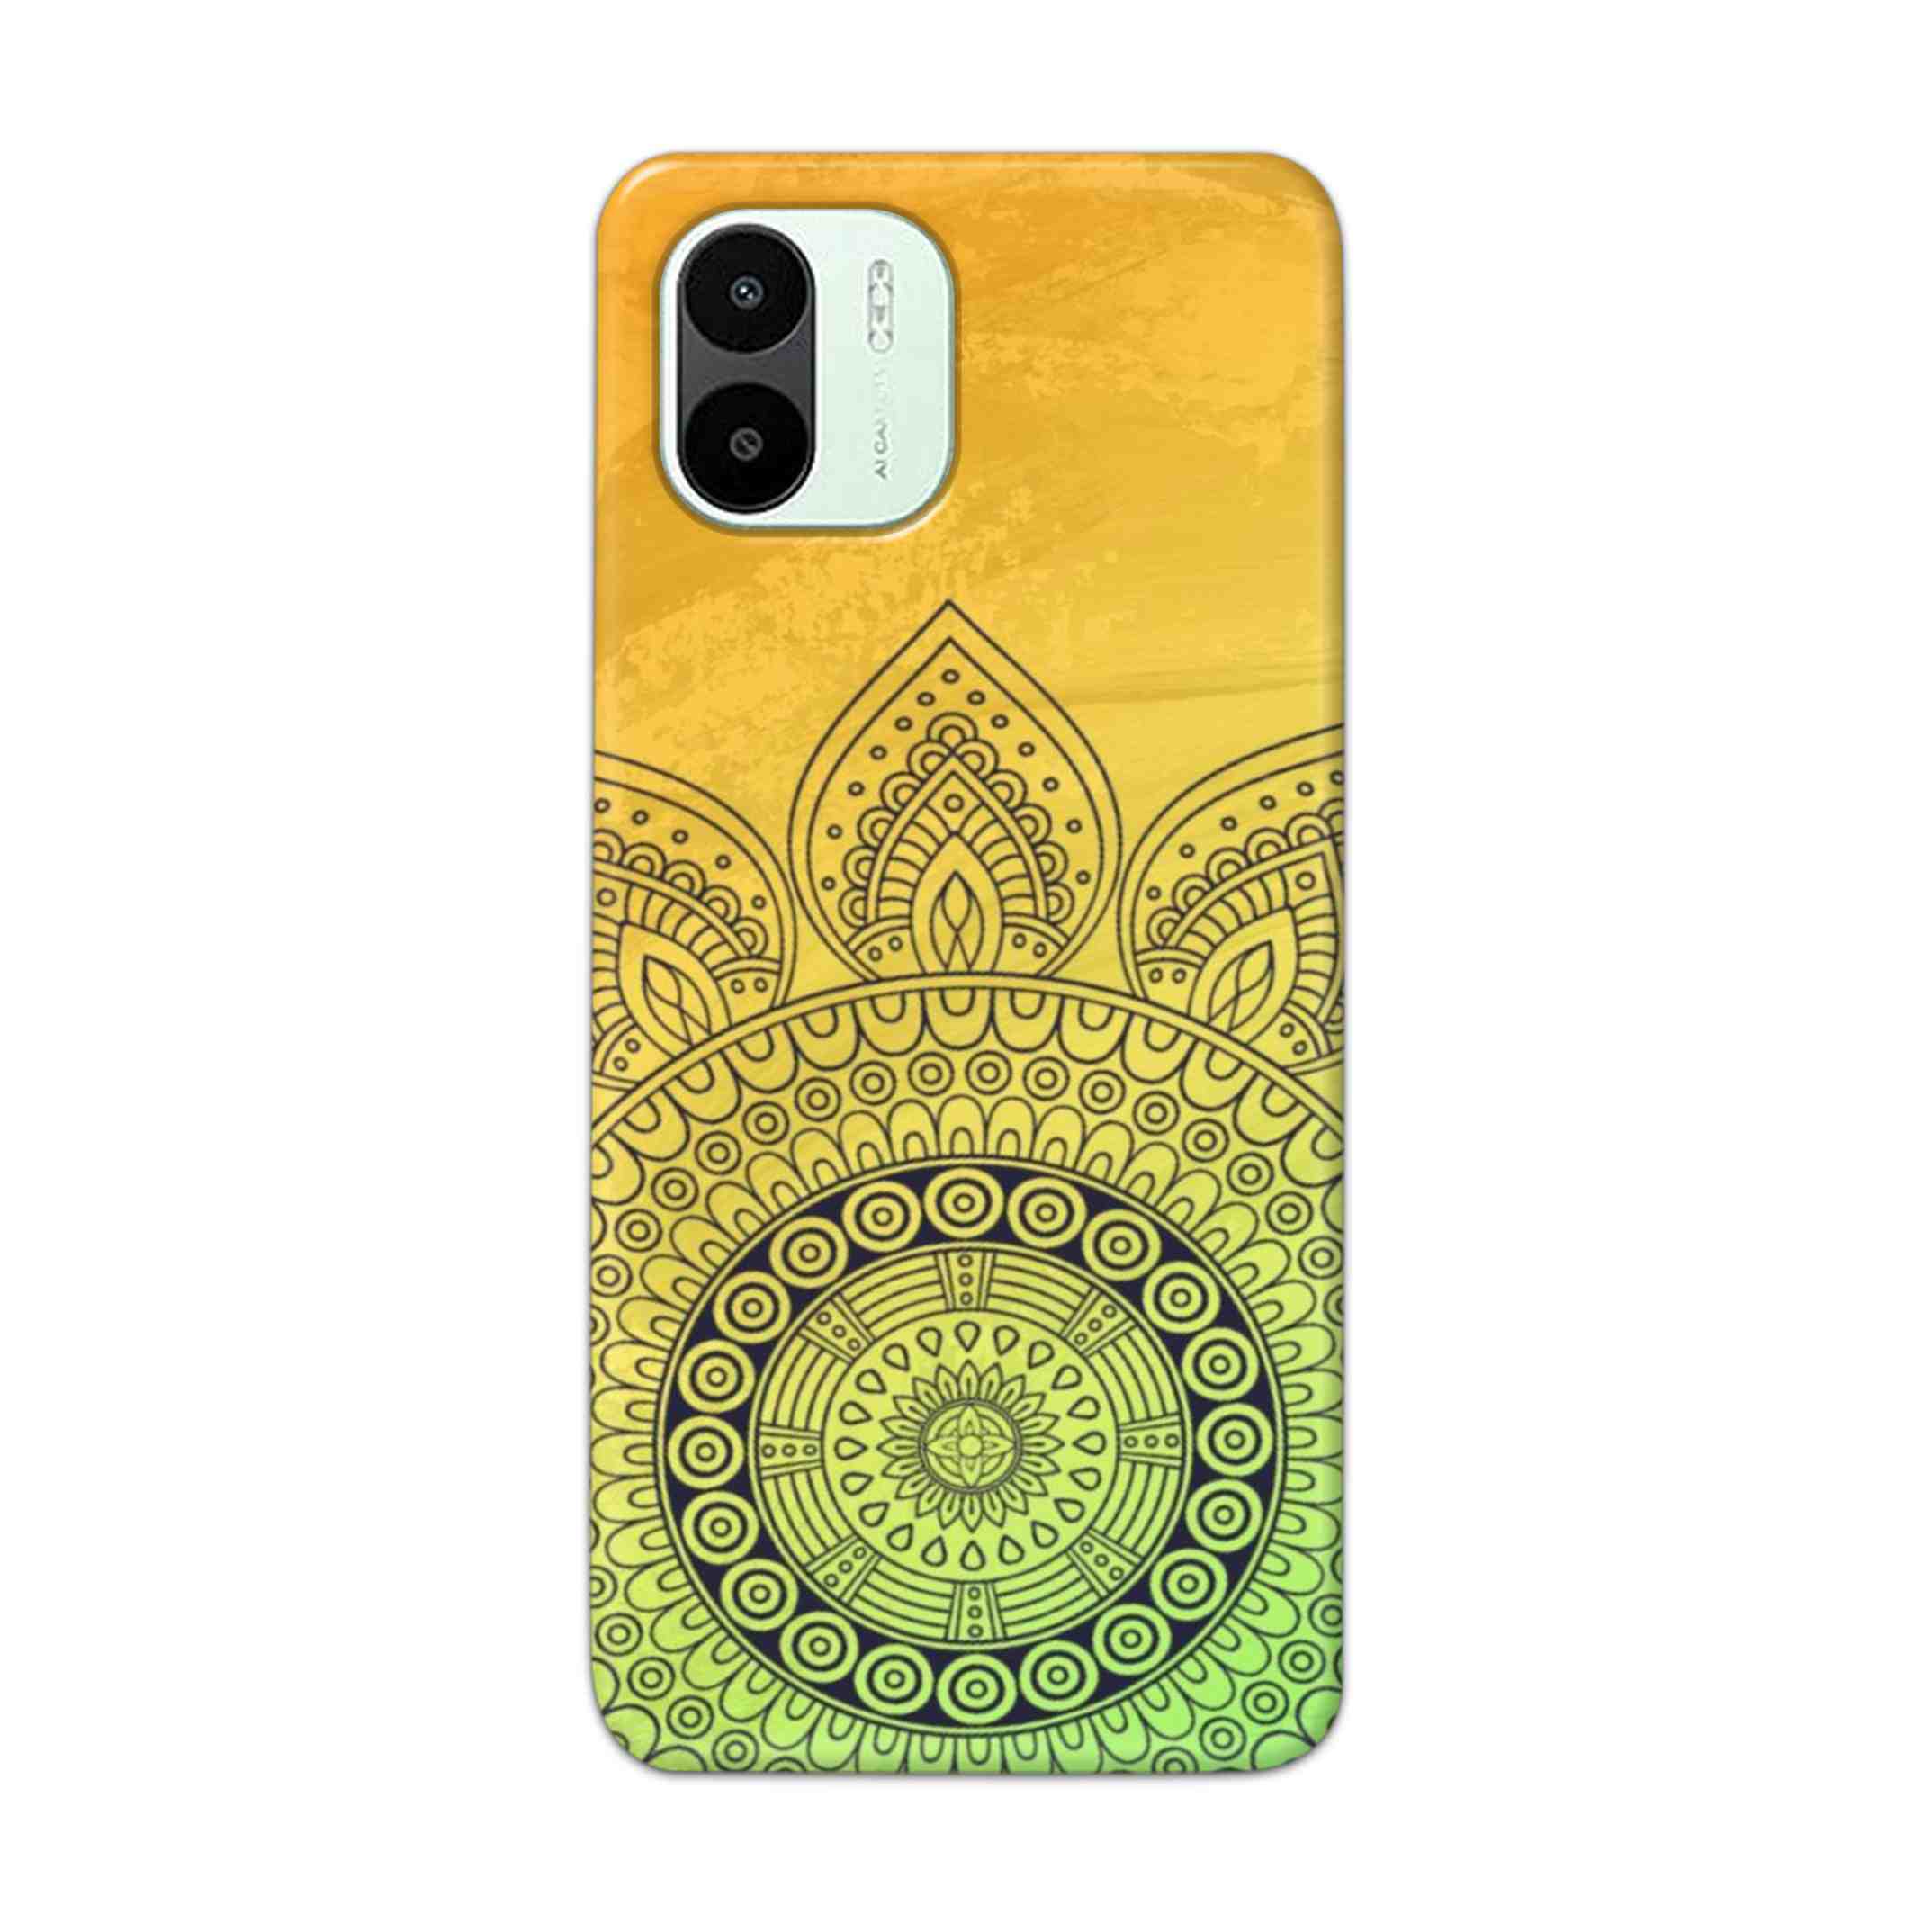 Buy Yellow Rangoli Hard Back Mobile Phone Case Cover For Xiaomi Redmi A1 5G Online